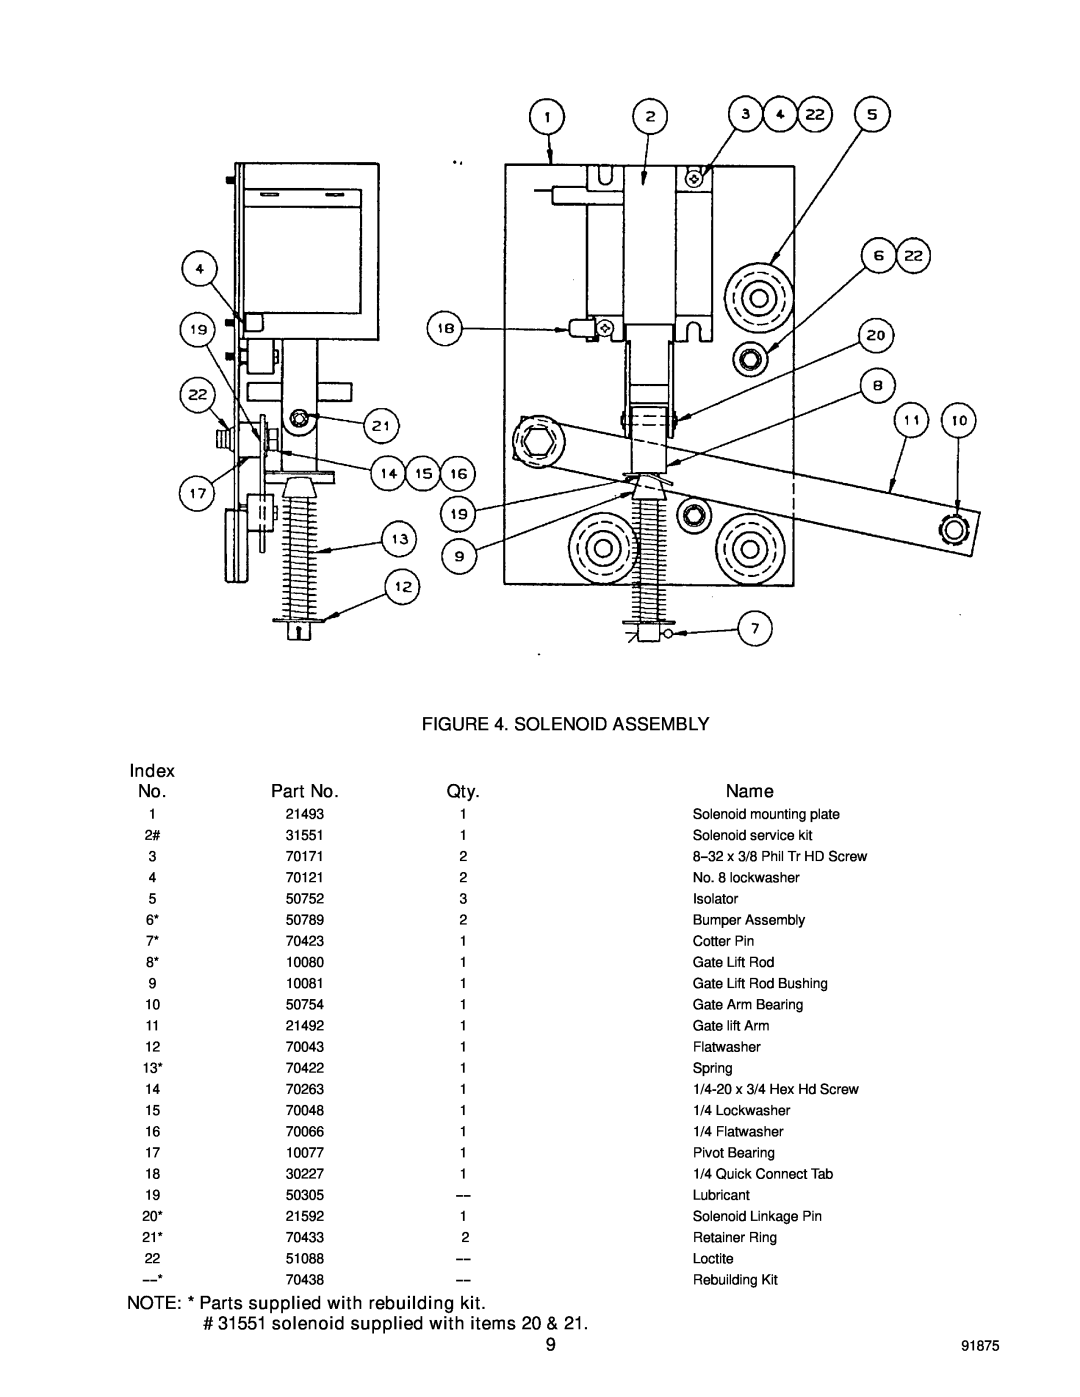 Cornelius D3030 Solenoid Assembly, Name, NOTE * Parts supplied with rebuilding kit, # 31551 solenoid supplied with items 